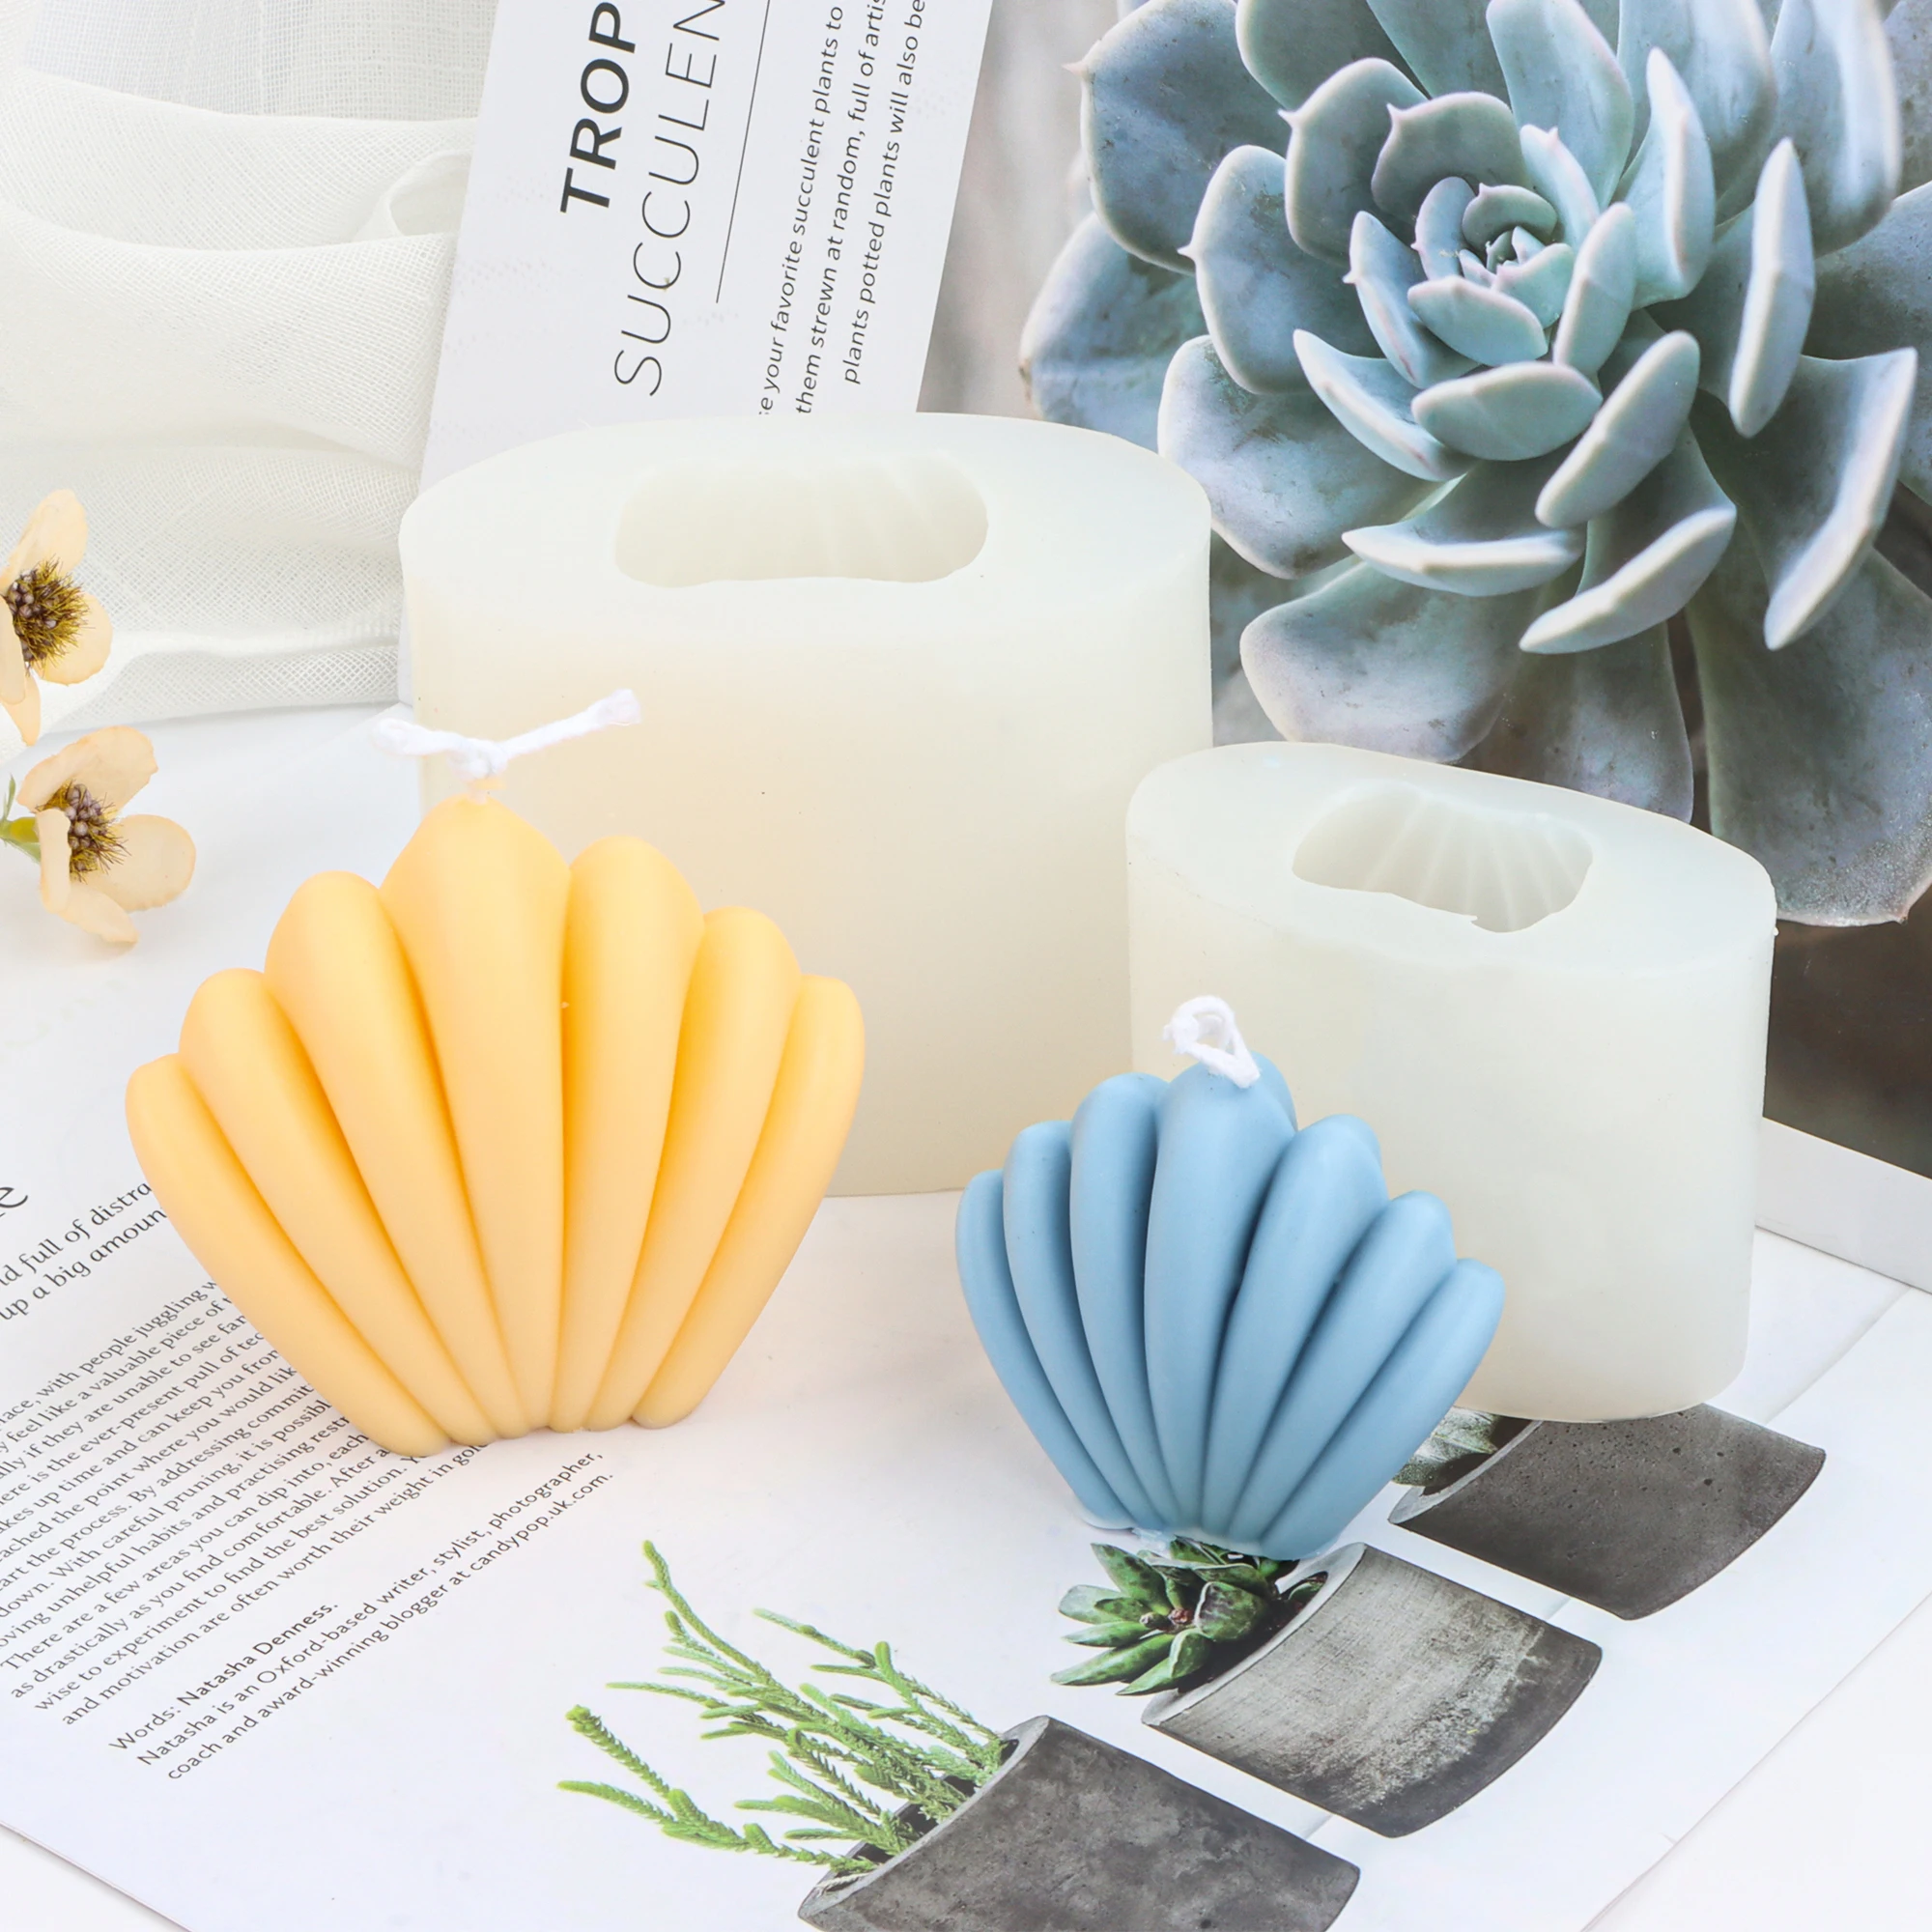 

2021 new Resistance Soap Reusable Effect Molds Silicone Beautiful Decorative Sell Best Shape Soap mold Candle handmade